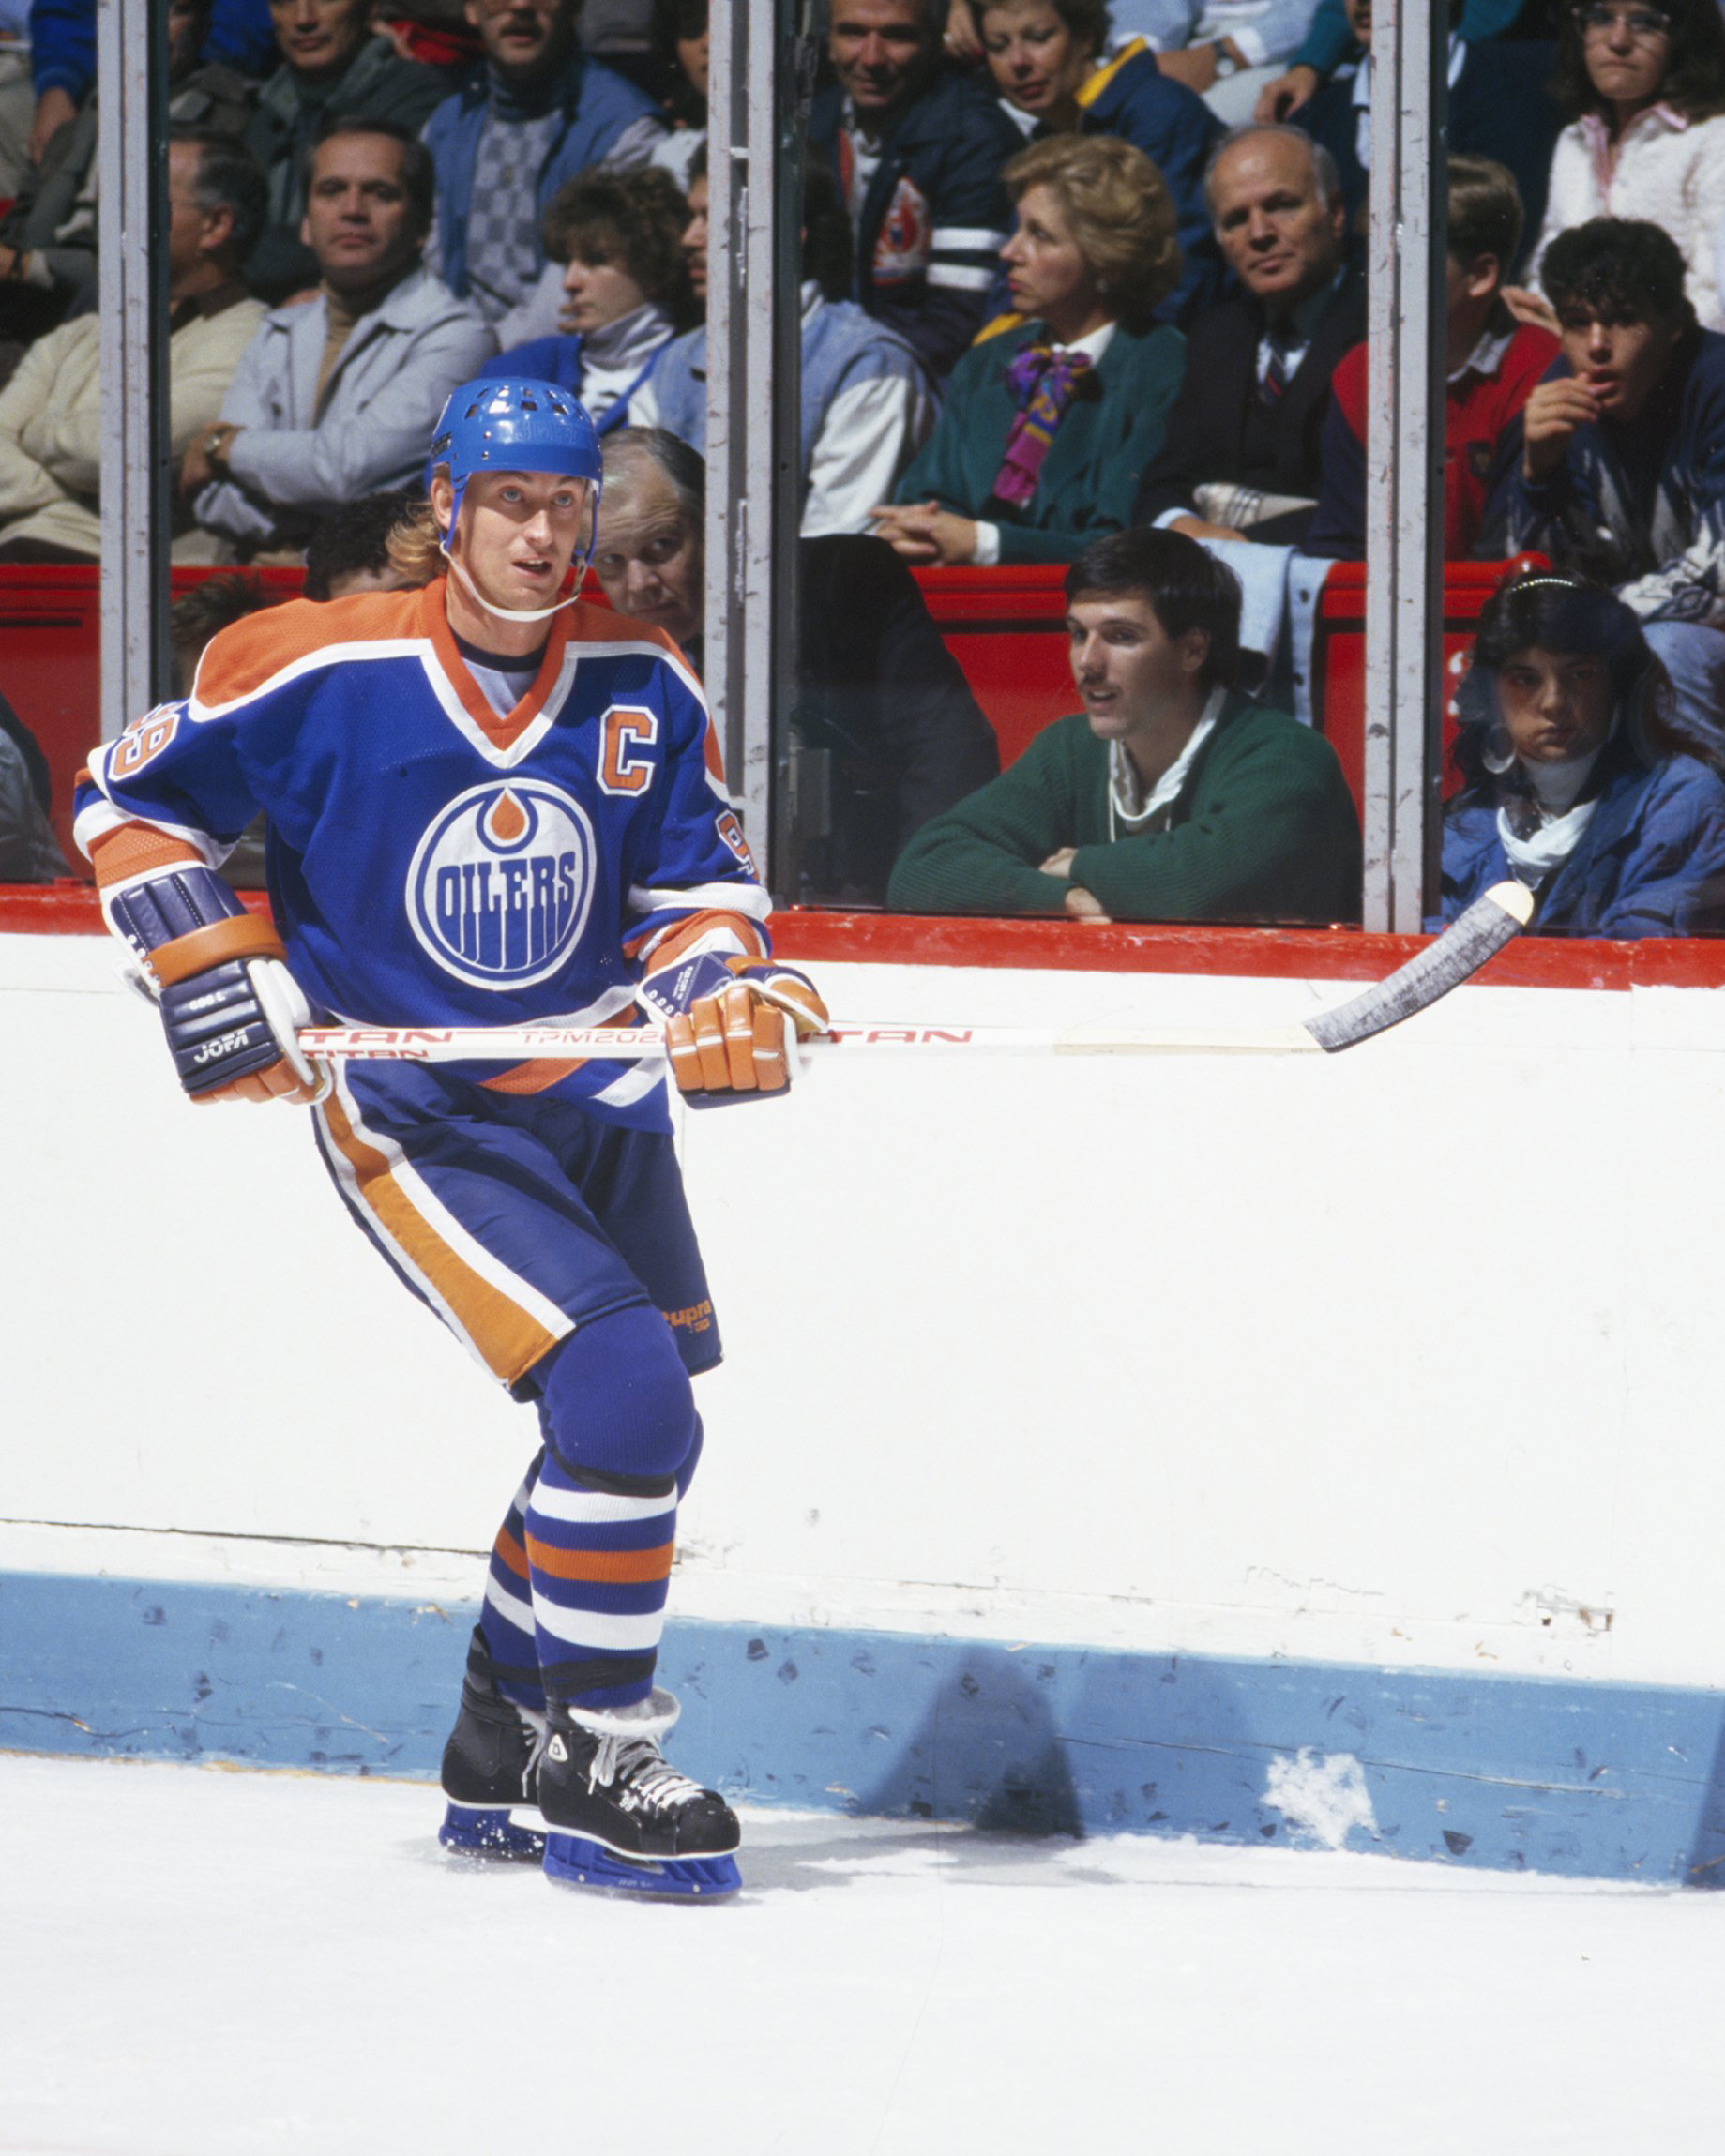 In a terrible twist of fate, the teammate that hockey legend Wayne Gretzky credited with helping him overcome his fear of flying later died in one of the planes that crashed on 9/11. In a 2001 Sports Illustrated tribute, Gretzky wrote that former teammate Ace Bailey, who played his last season as a pro on the Edmonton Oilers when Gretzky was a rookie, was the only one who could calm him during a flight. Ace, then a professional scout, was on United Airlines flight 175, which crashed into the south tower of the World Trade Center. “It's so sad and ironic that Ace died in an airplane because he helped me more than anyone else,” Gretzky wrote. “He was so strong and calm, and when he told me that everything would be O.K., I believed him.”